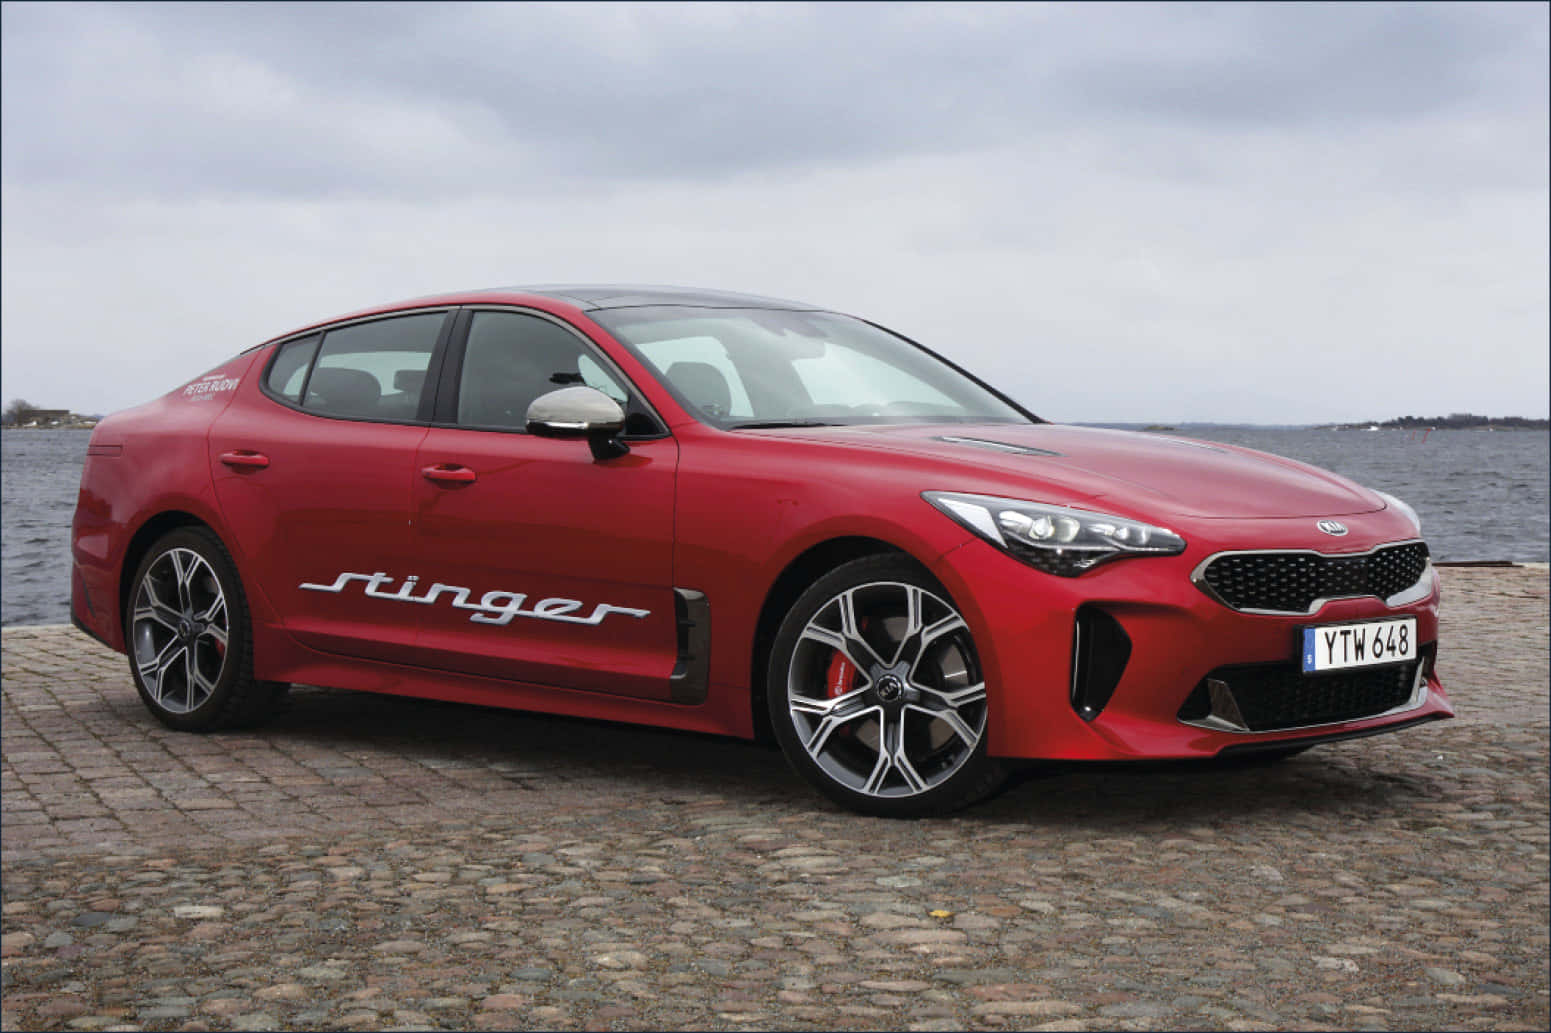 Powerful Kia Stinger Sports Car in Action Wallpaper